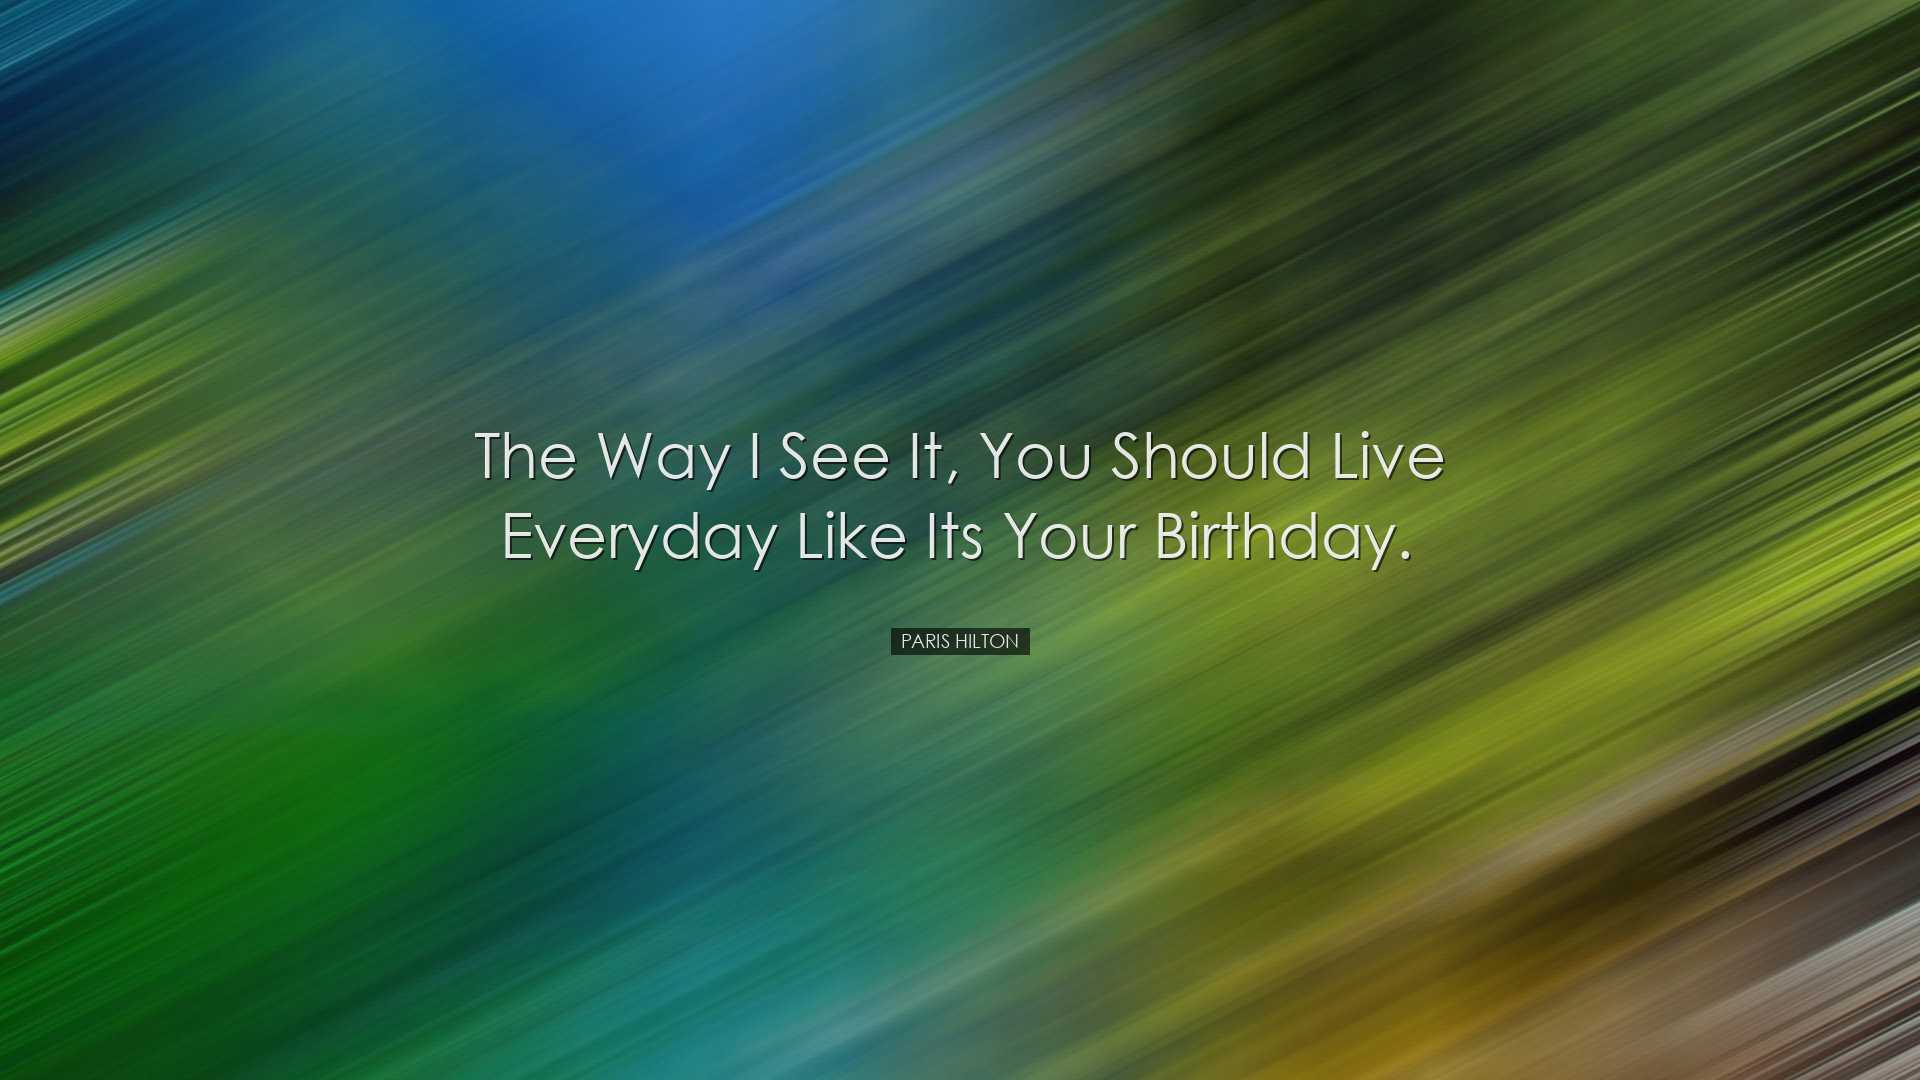 The way I see it, you should live everyday like its your birthday.